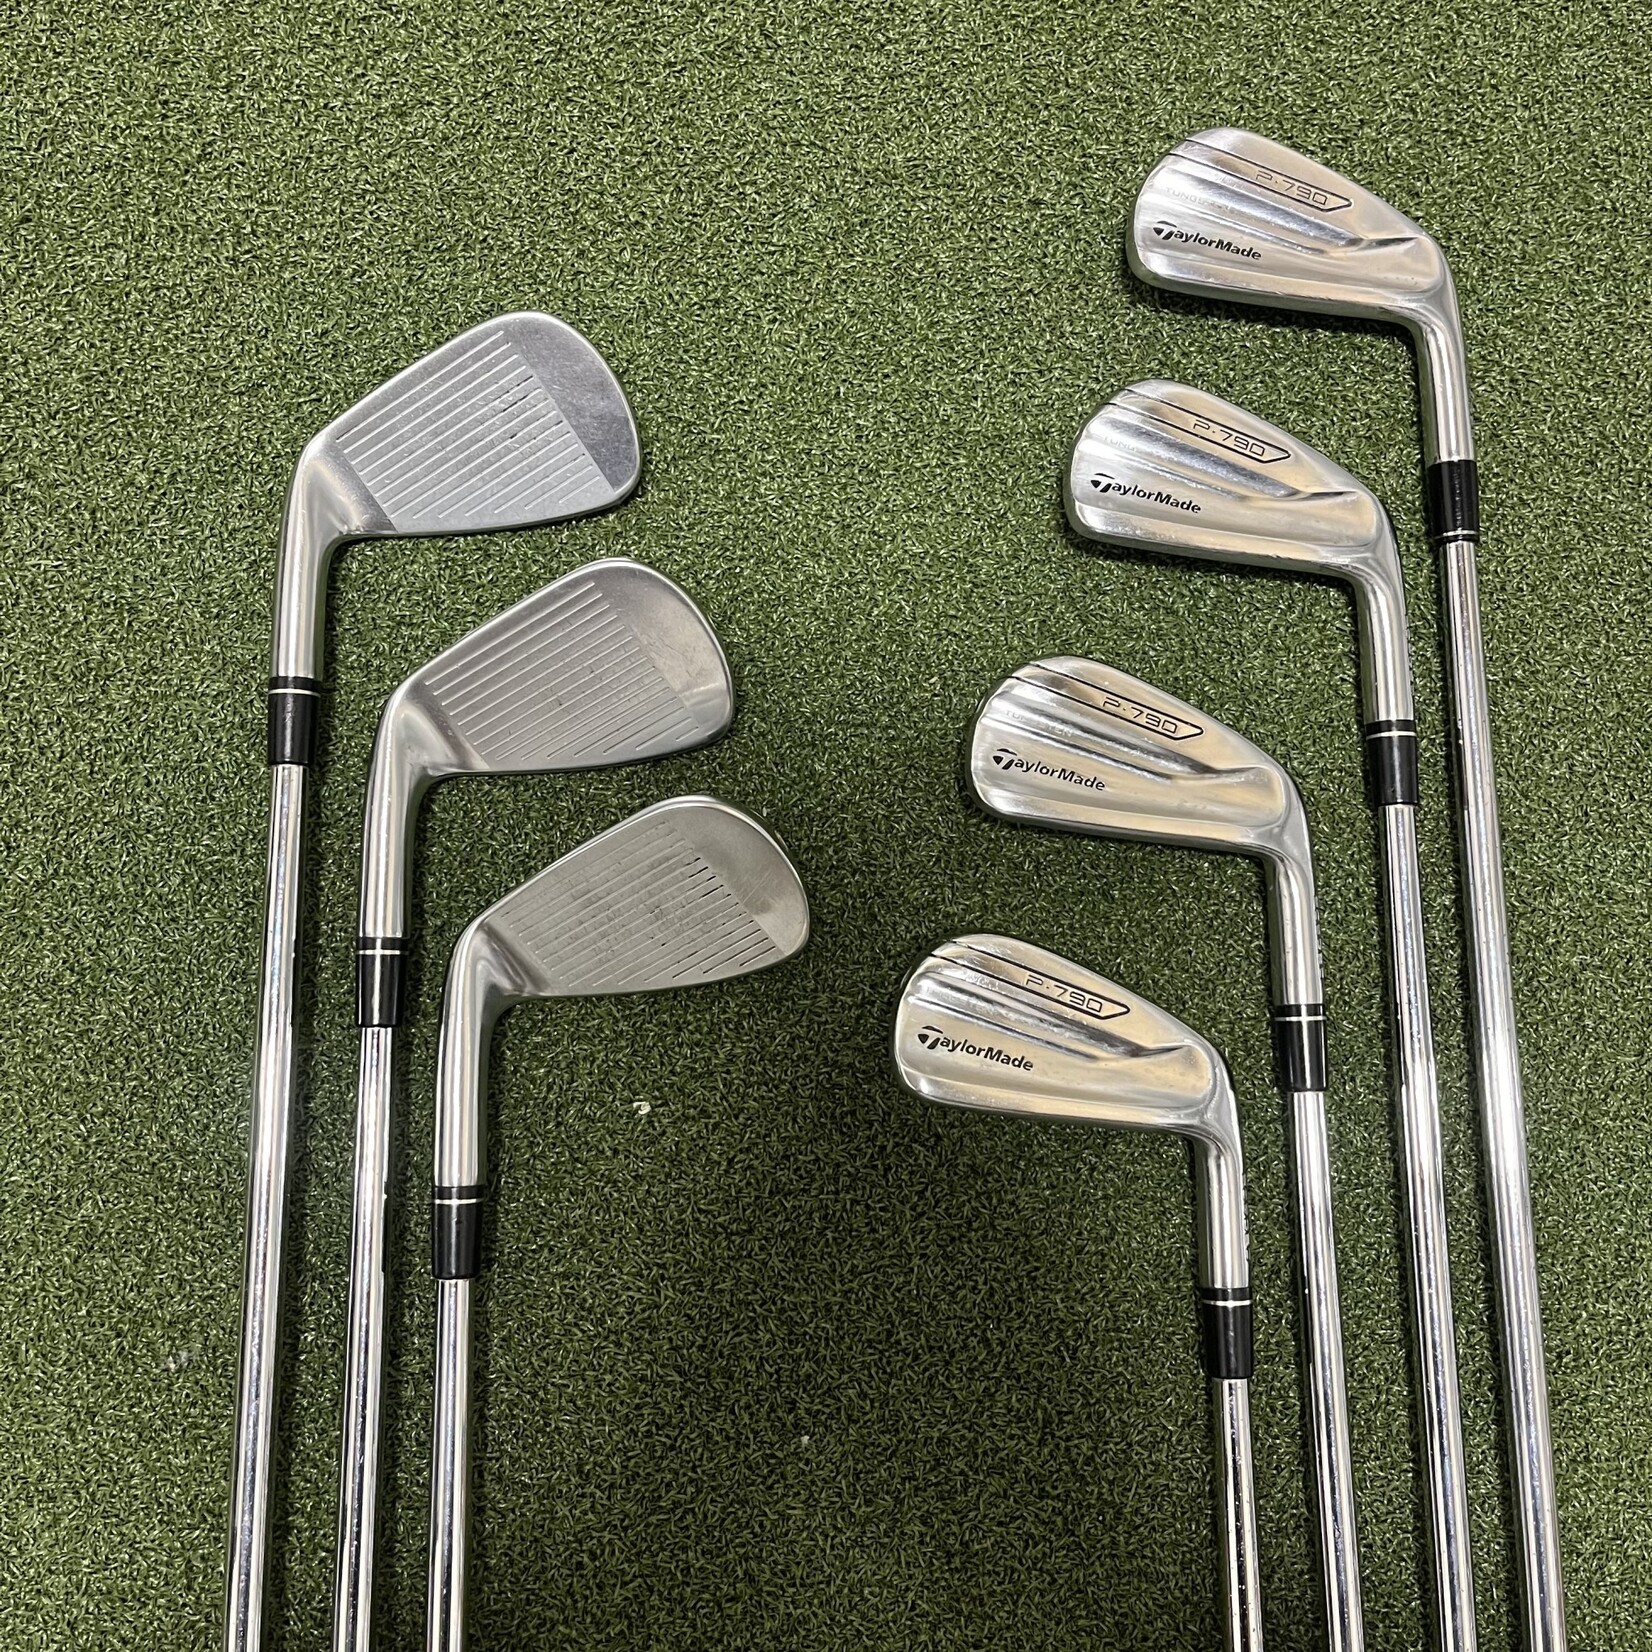 TaylorMade (Pre-owned) Taylormade P790 Iron Set 4i-AW Dynamic Gold 105 R300 Regular Flex (RH)